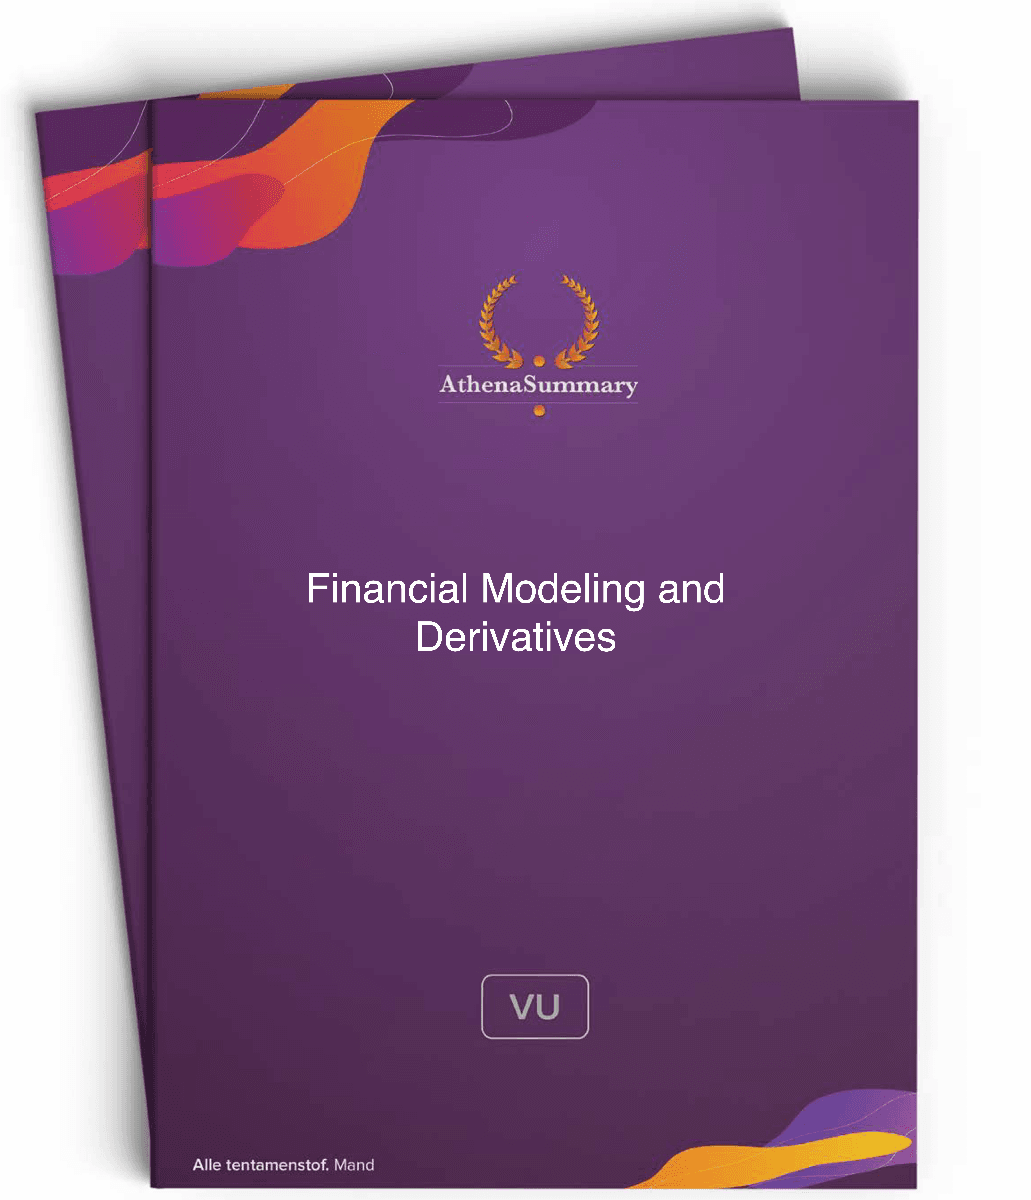 Summary: Financial Modeling and Derivatives